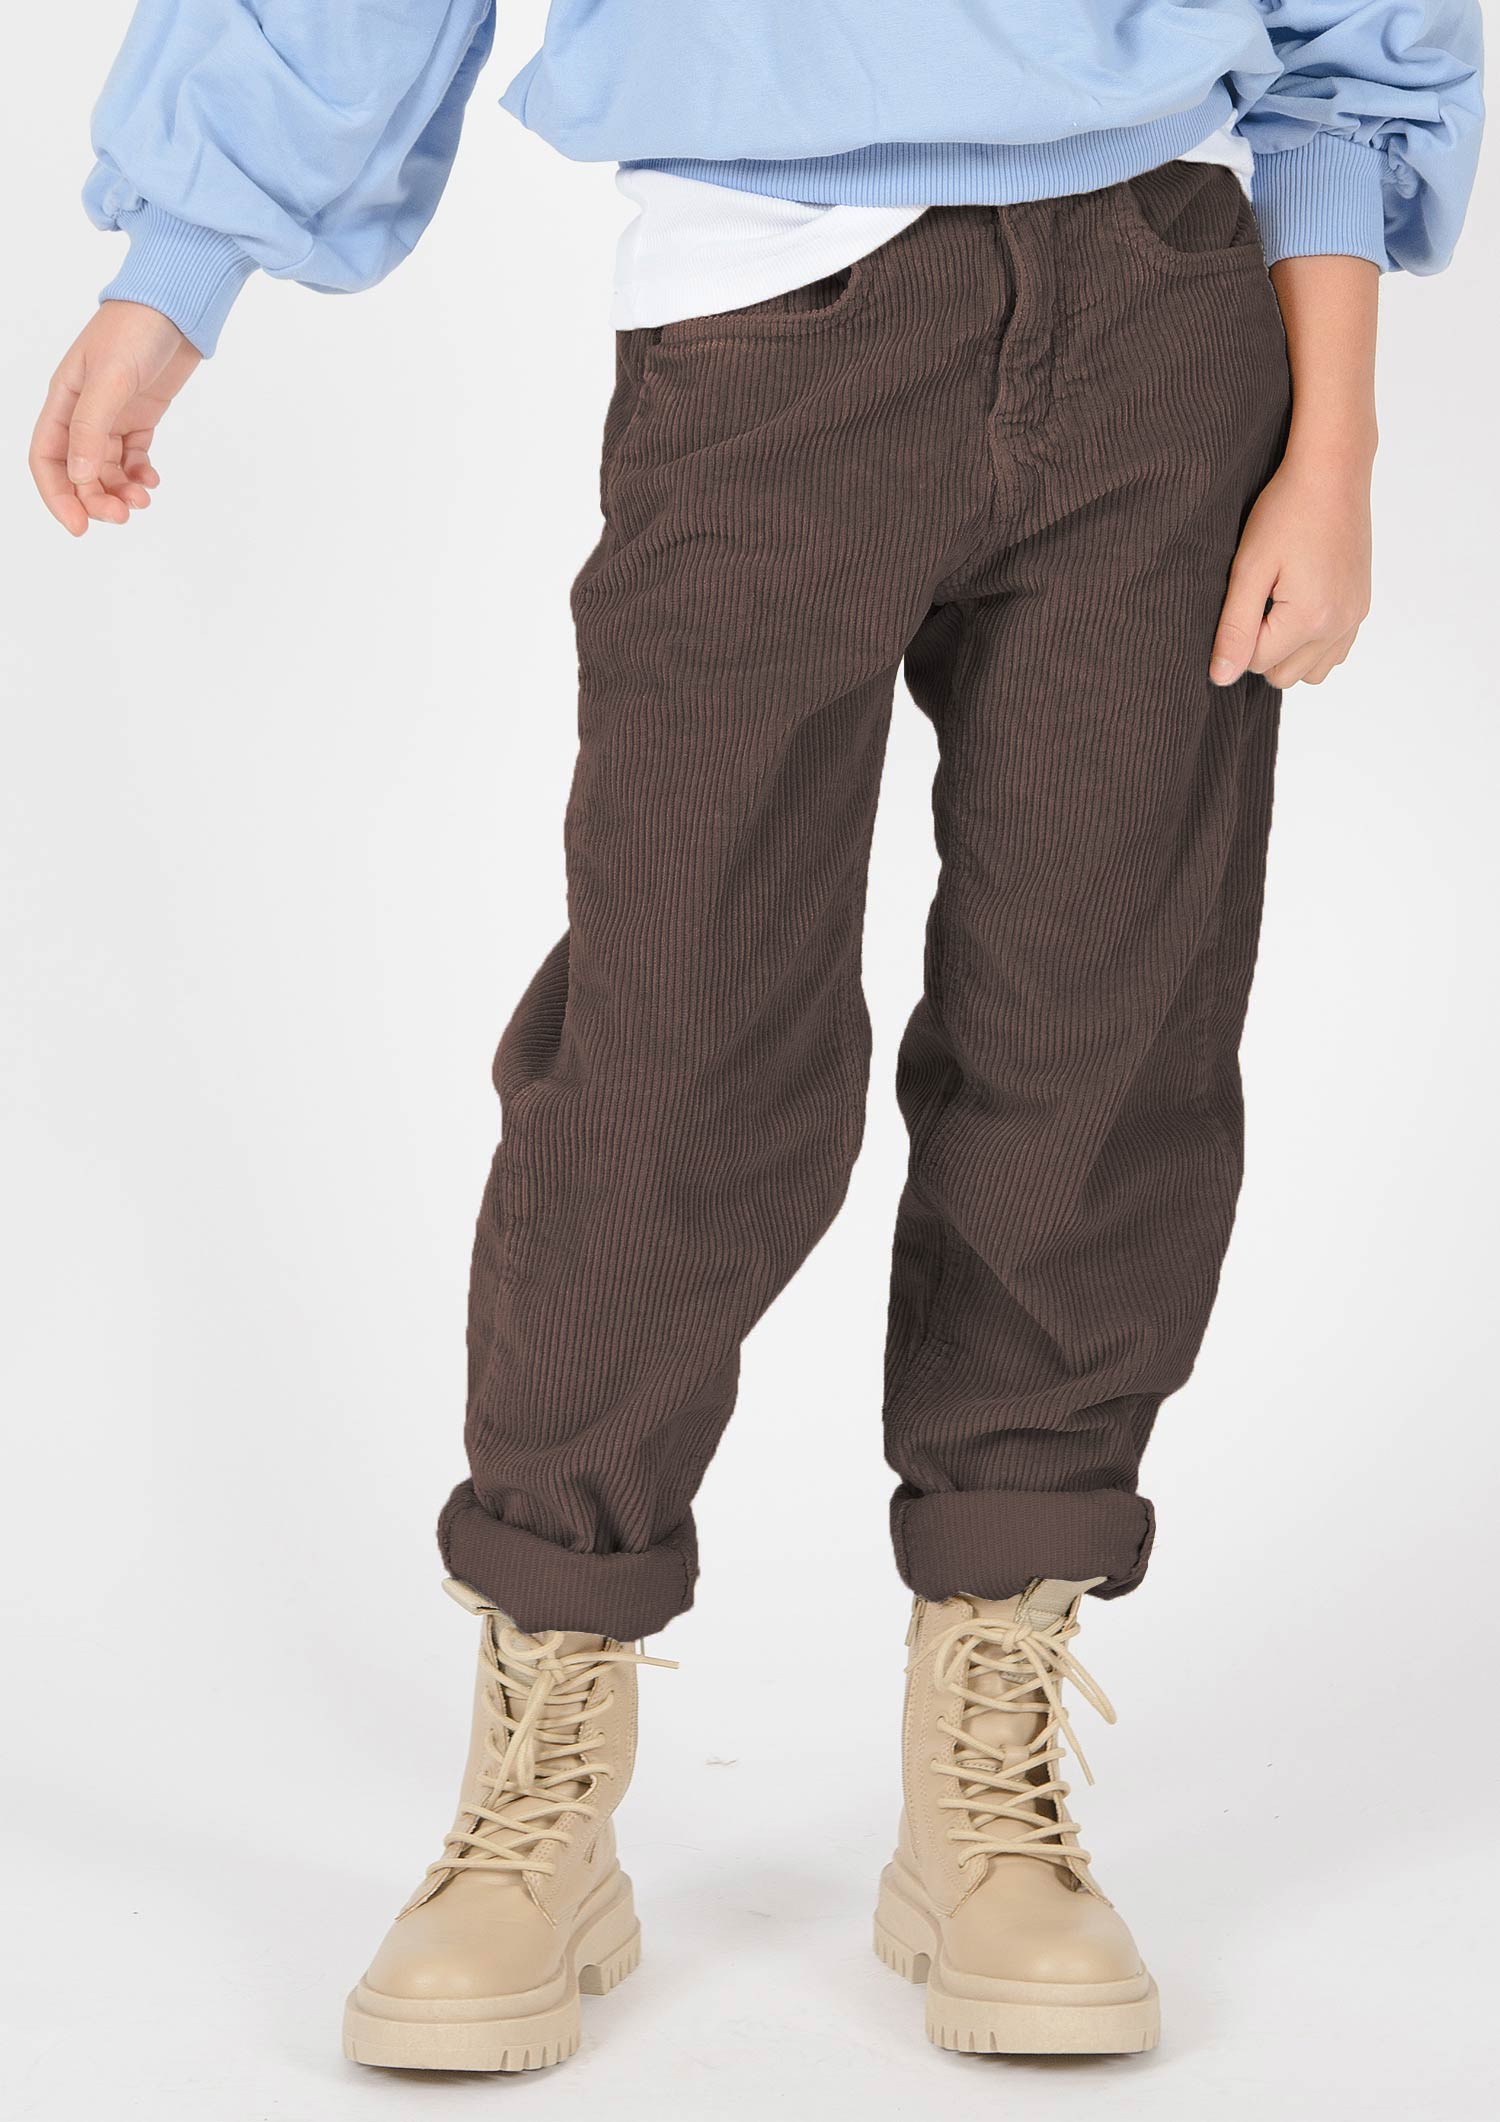 1338-Girls Balloon Fit Pant Cropped, Corduroy, available in Slim,Normal